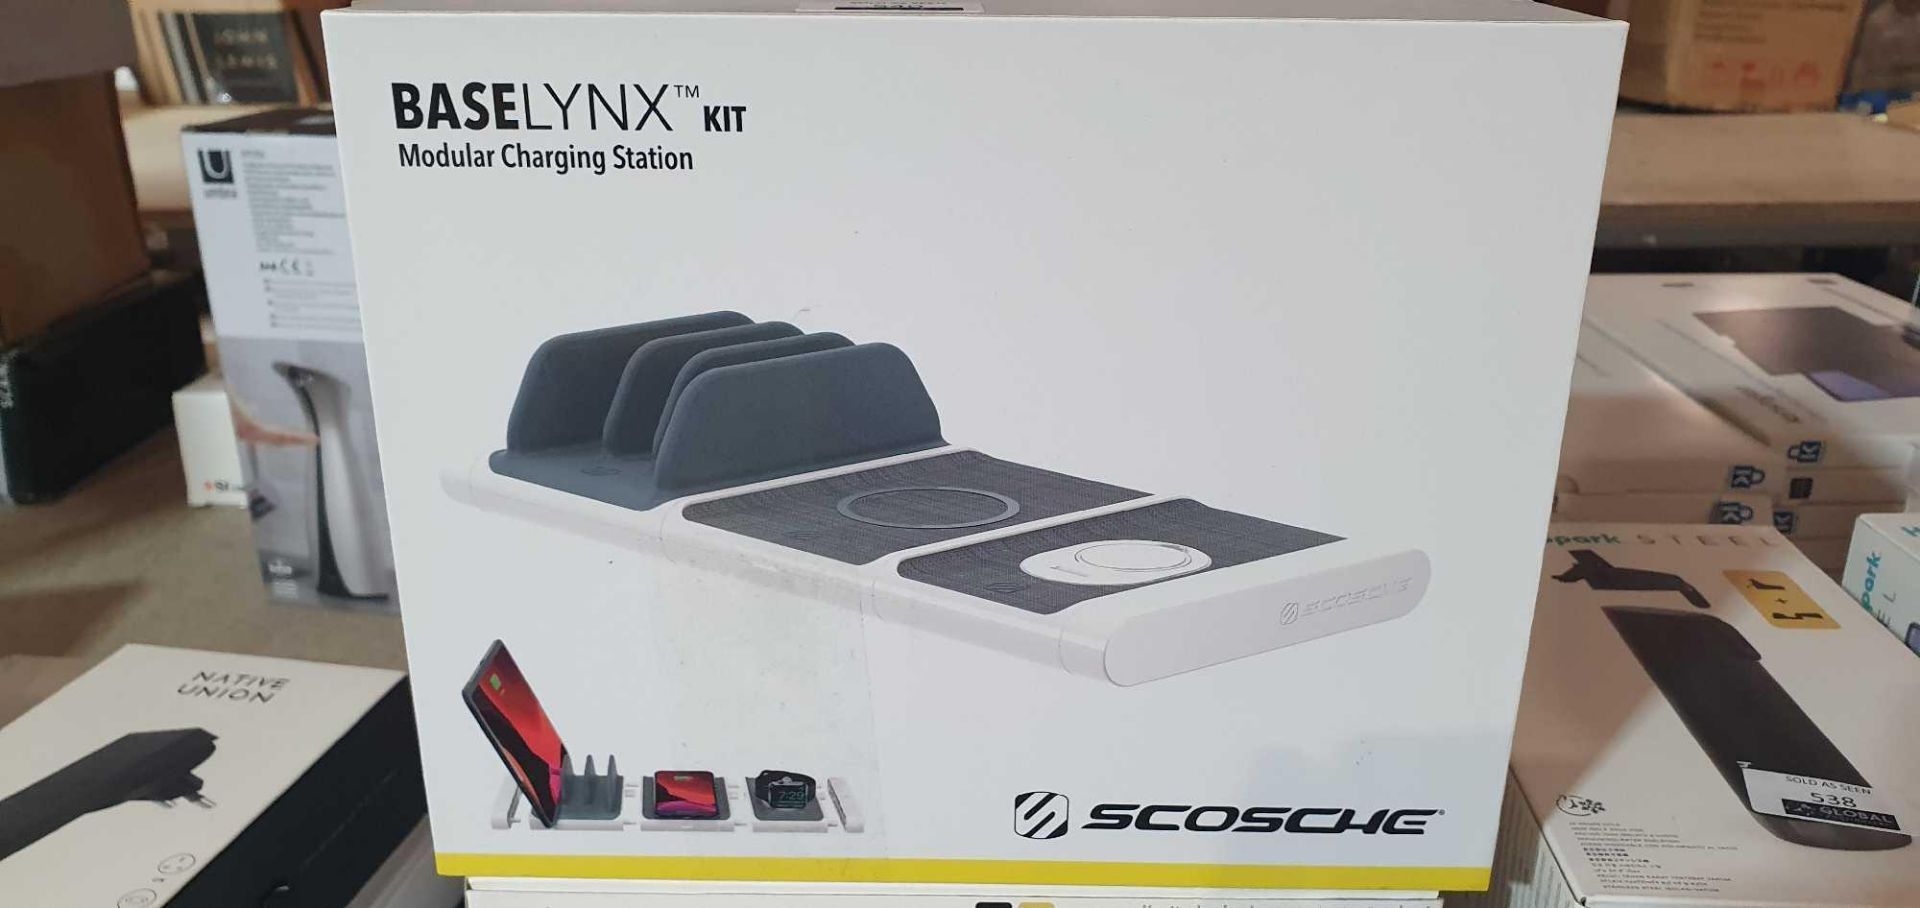 (Jb) RRP Â£150 Lot To Contain 1 boxed Scosche Base lynx Kit Modular Charging Station